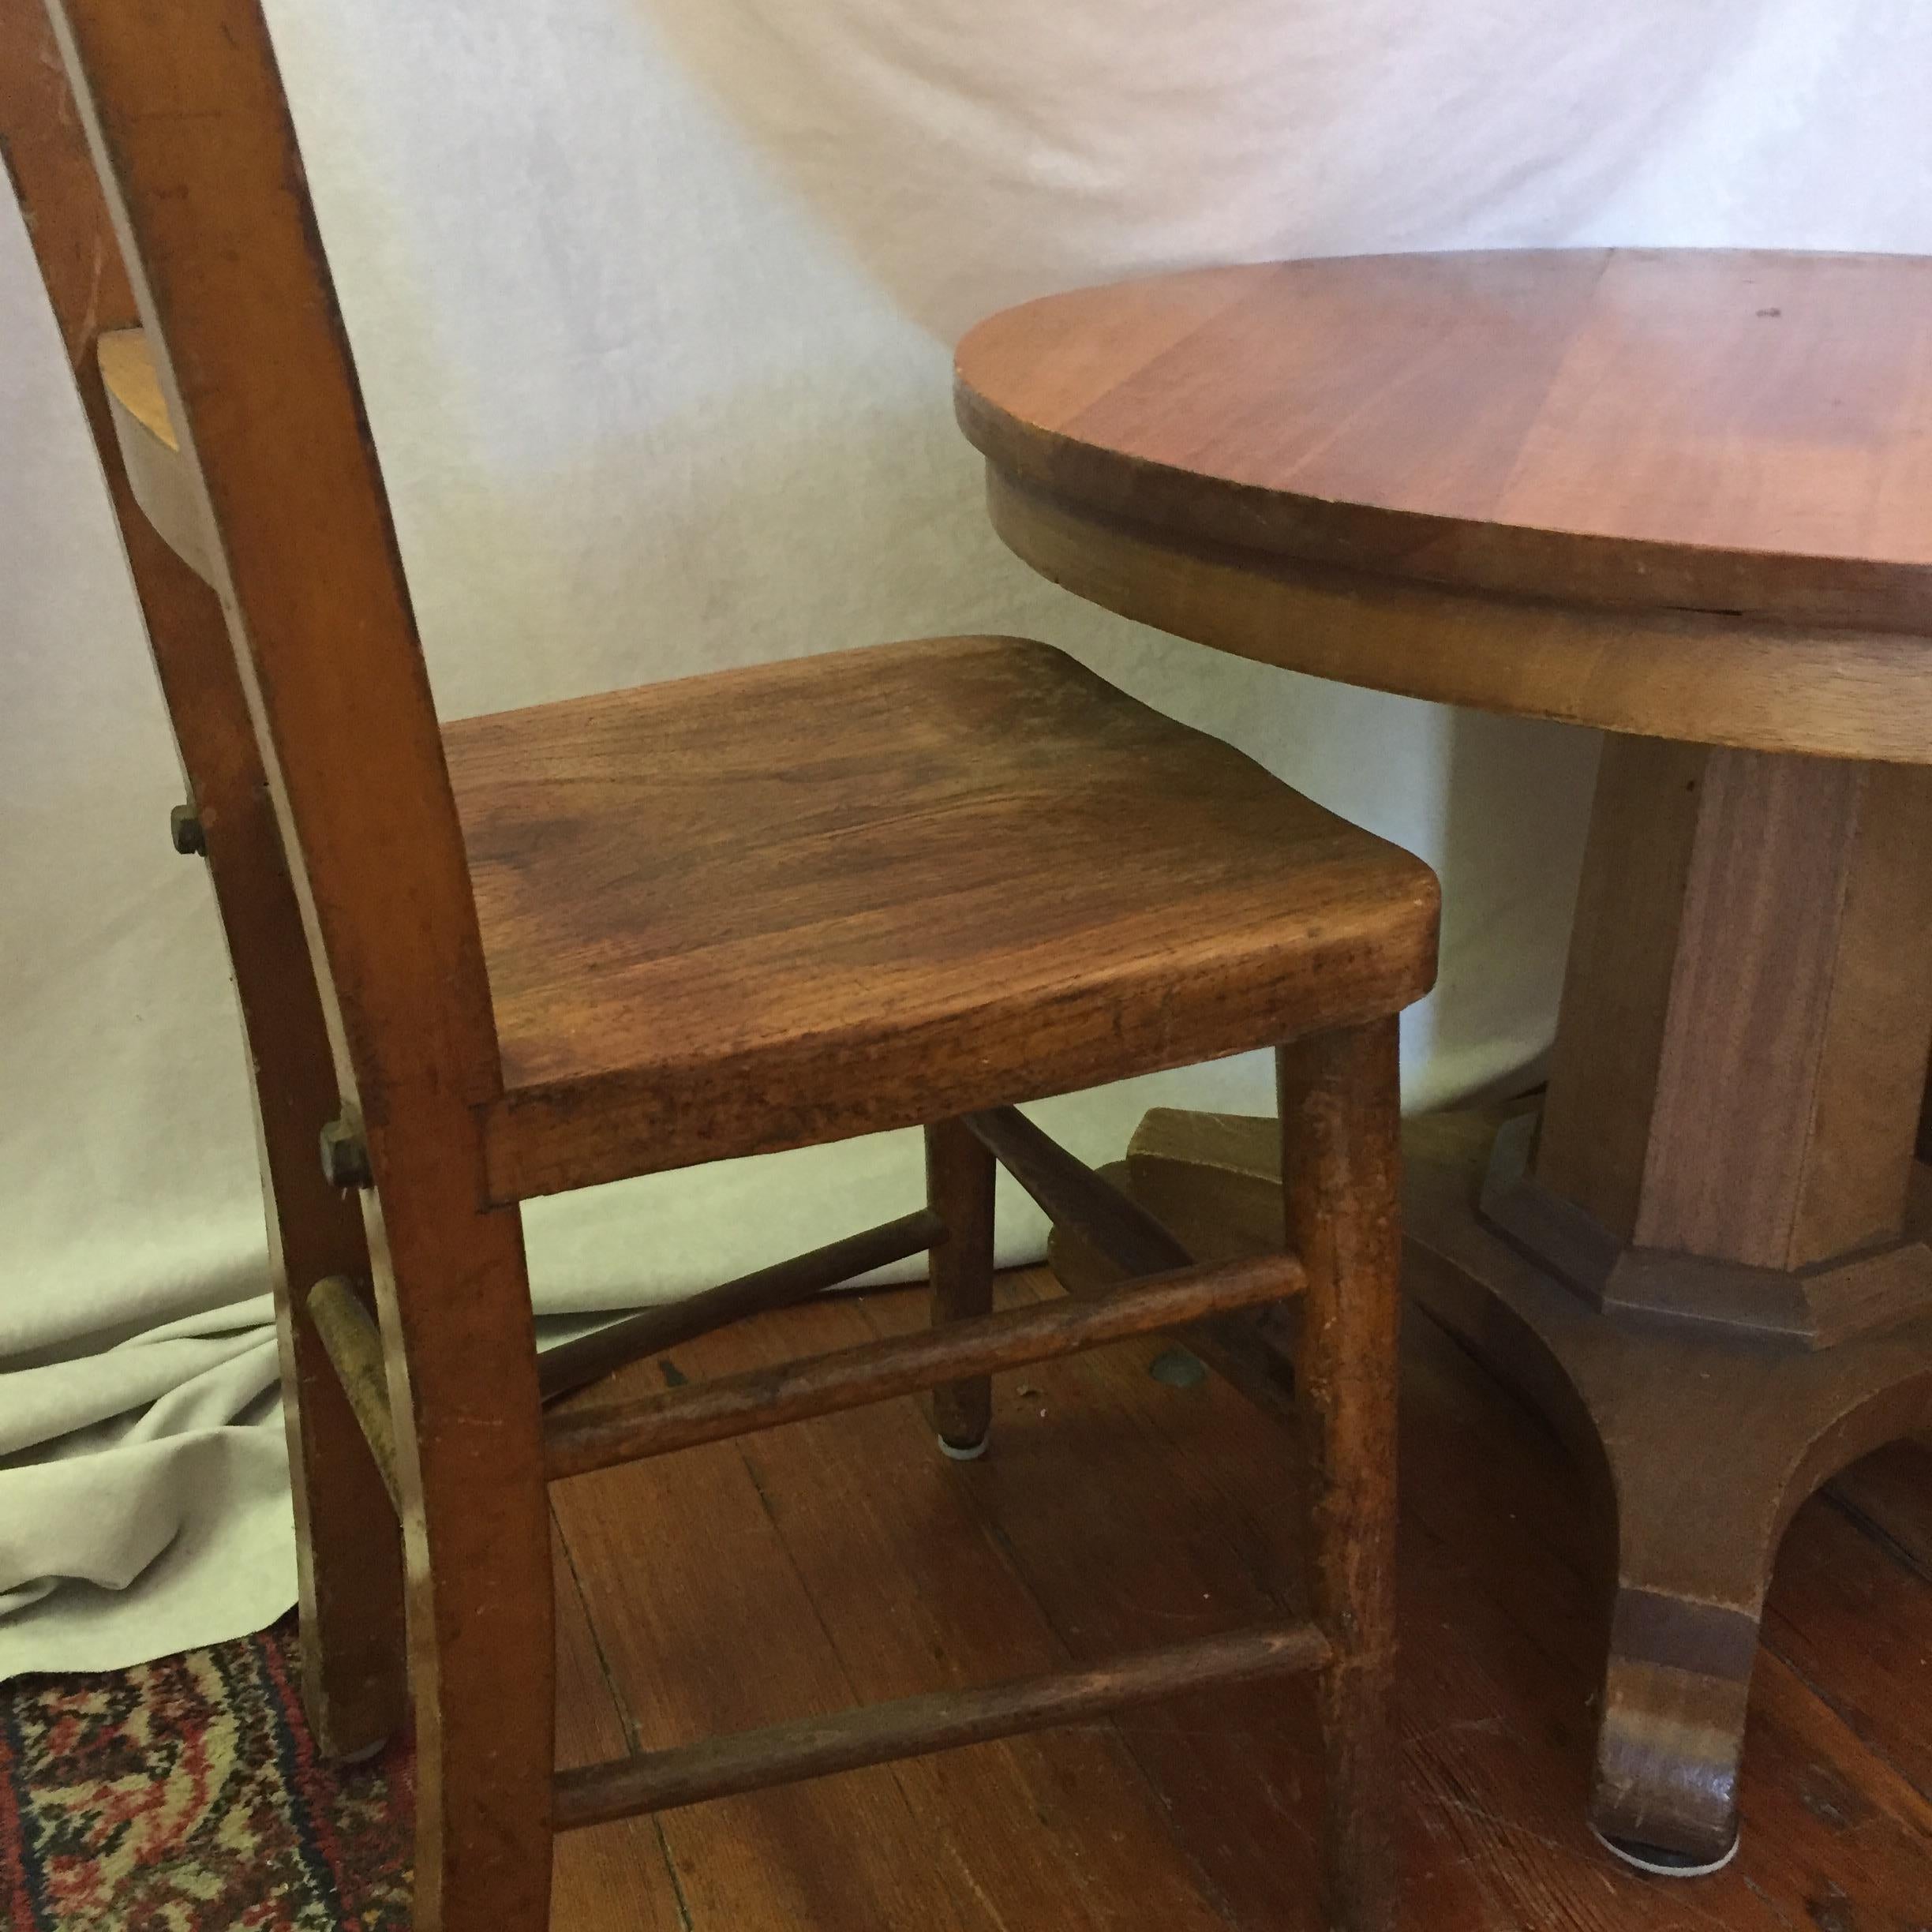 This table is quite special as it imitates what grownups use in their dining room. The top mounted on a pedestal is what makes it so desirable and collectible. Made of mahogany in the U.S. and nicely refinished. We hunted for years just to find some